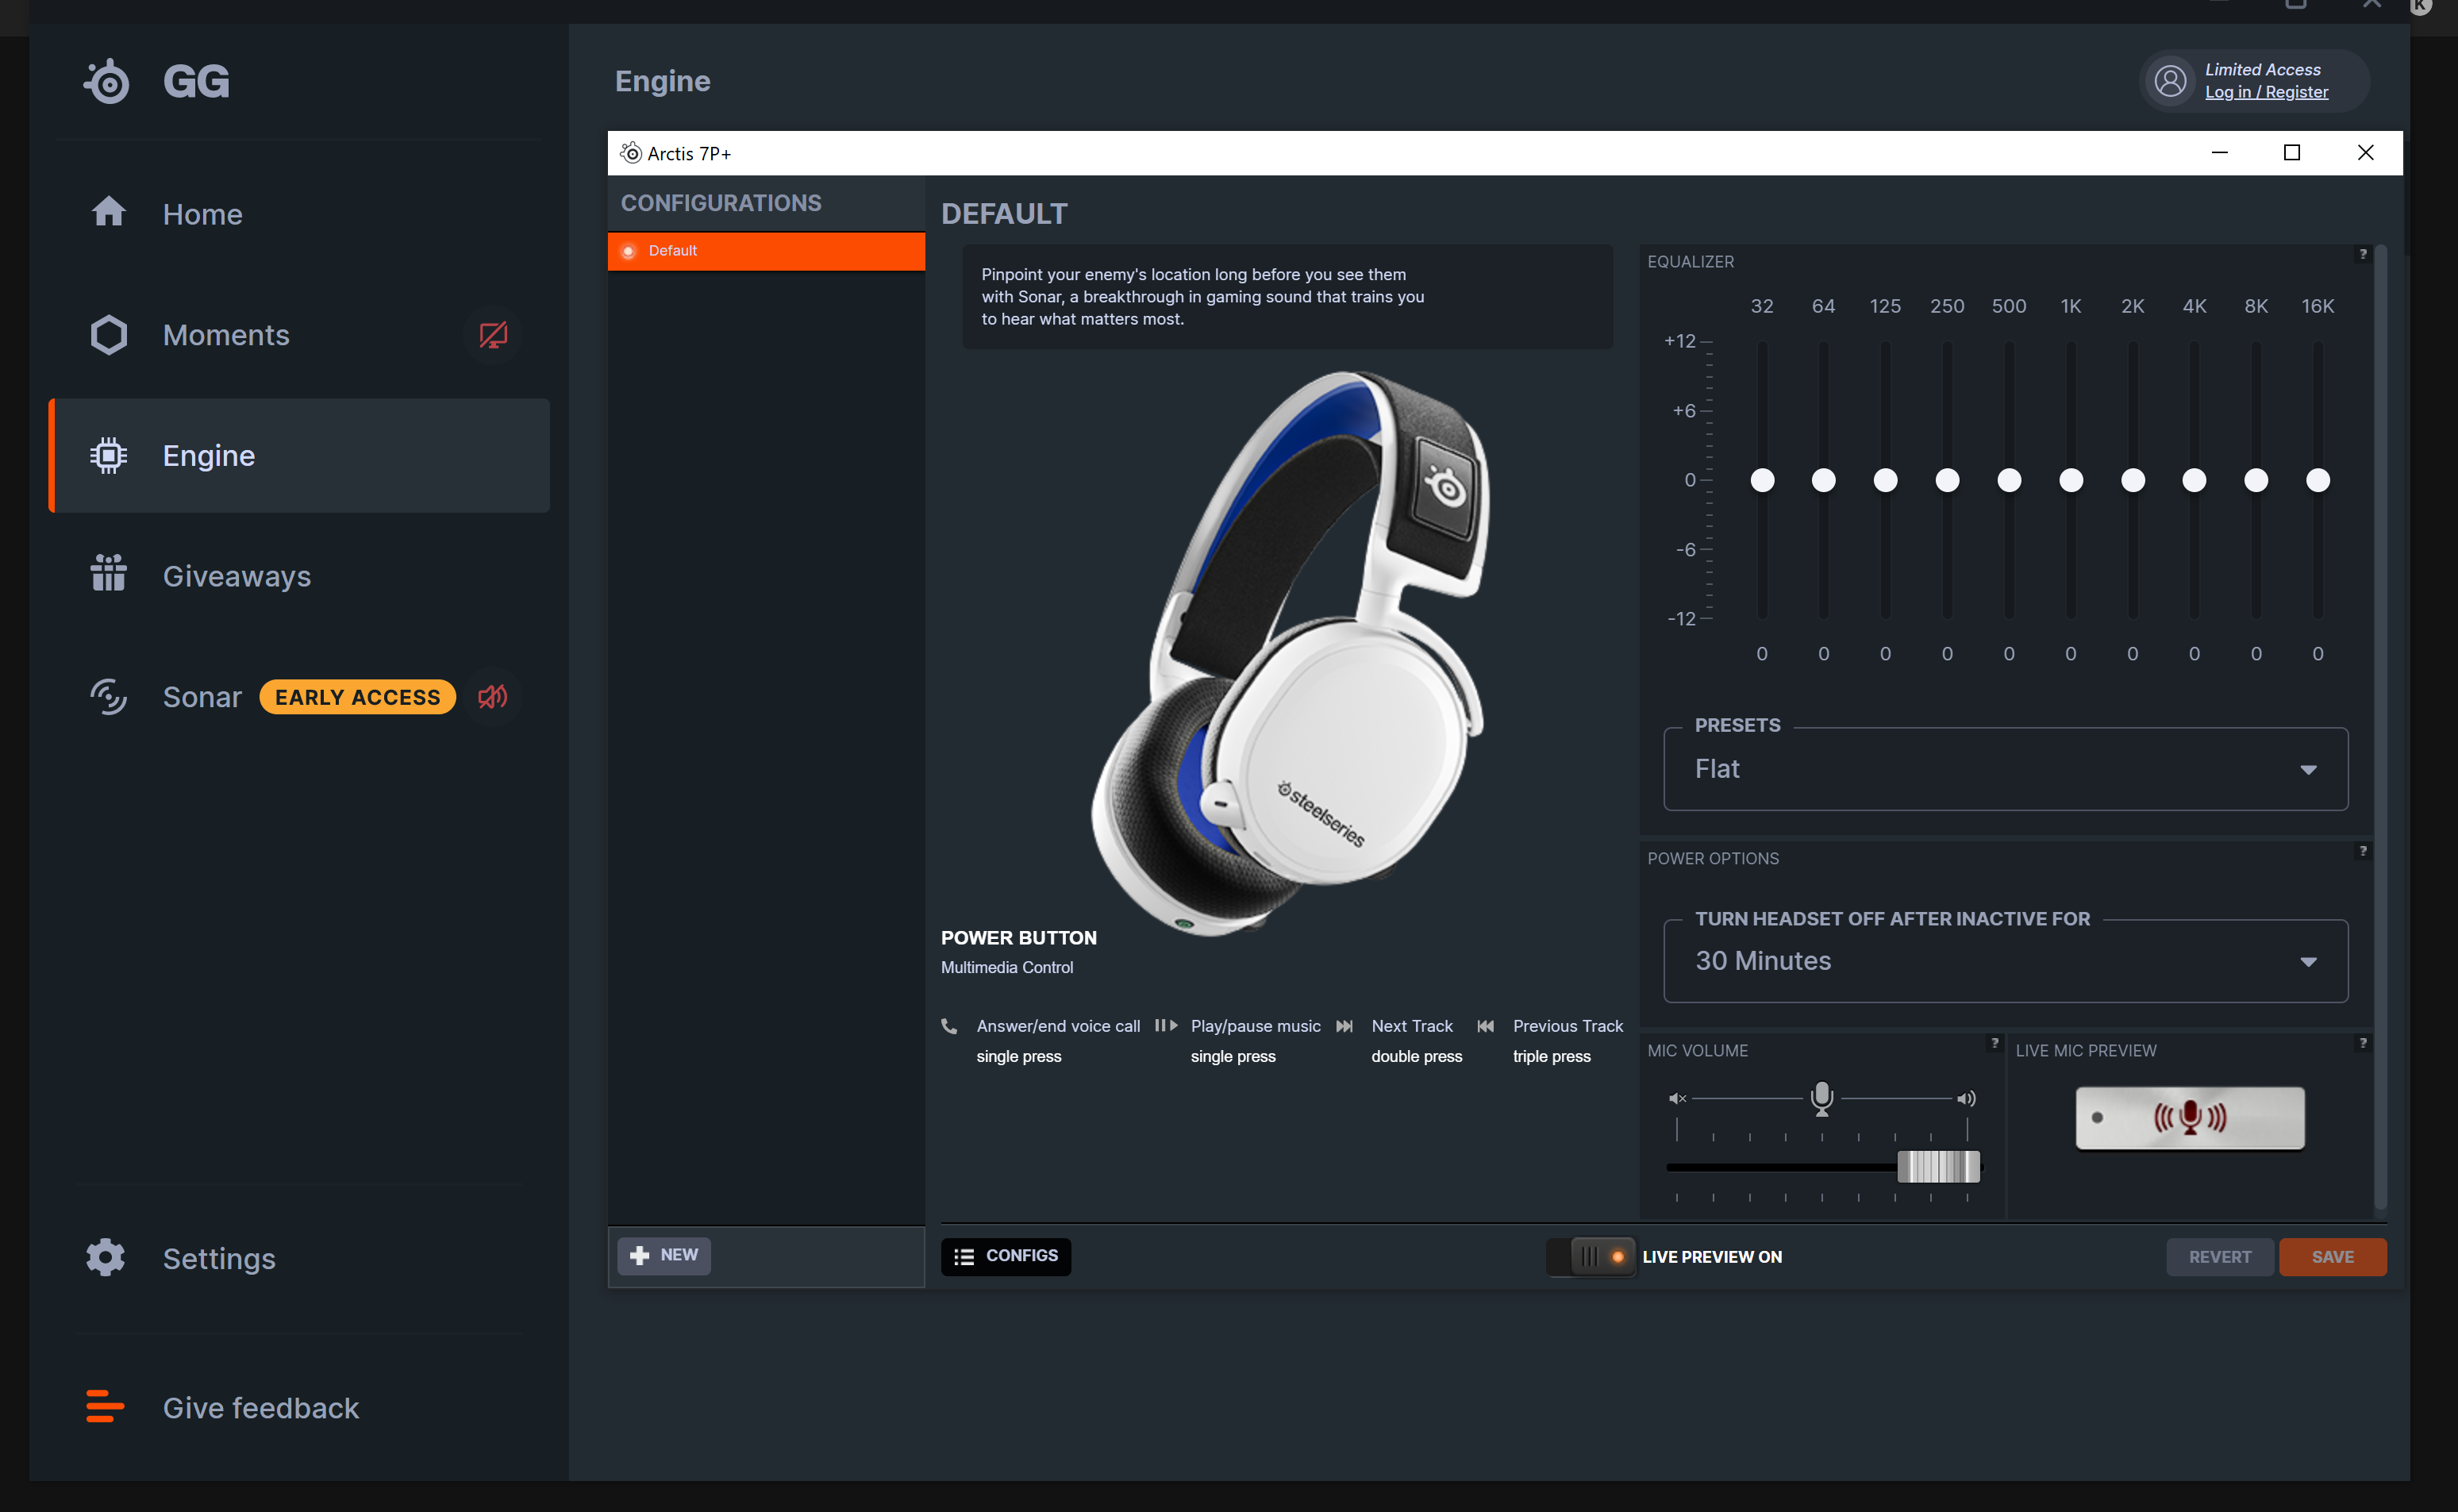 The SteelSeries GG software displaying the 7P+ Wireless Headset